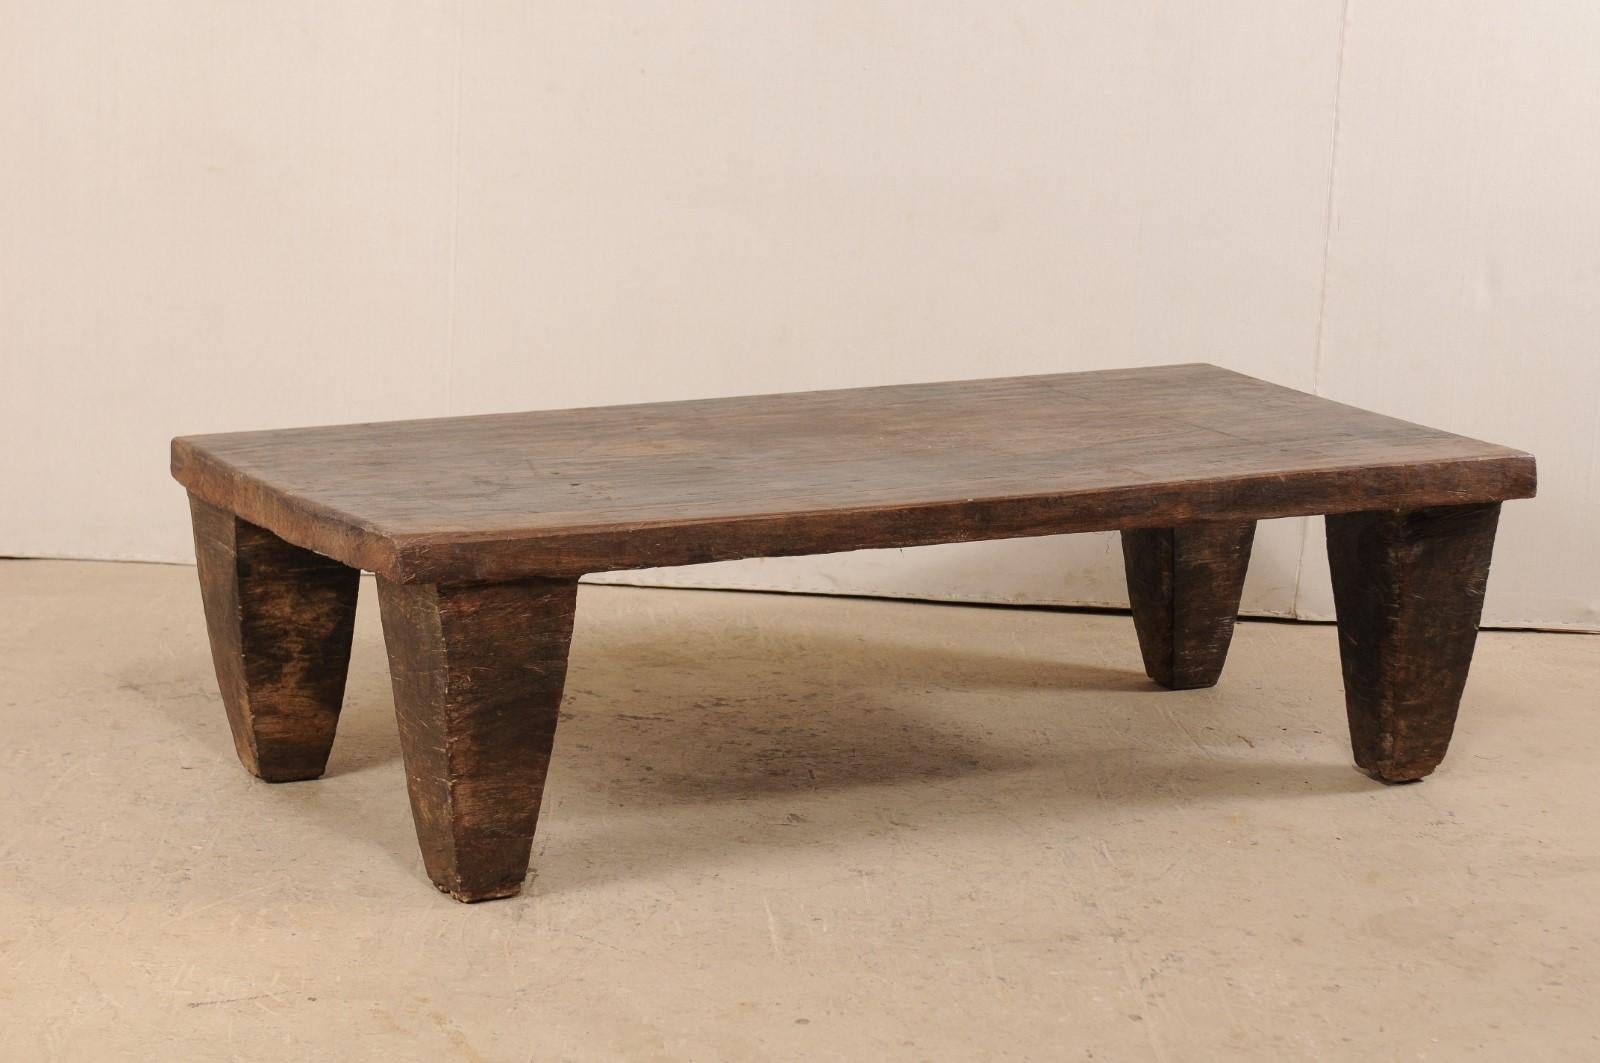 A primitive wood Naga daybed, or coffee table, from the early 20th century. This wooden bed from the Naga tribes of Nagaland, North East India has been carved out of a single log and would make for a great coffee table and conversational piece. This